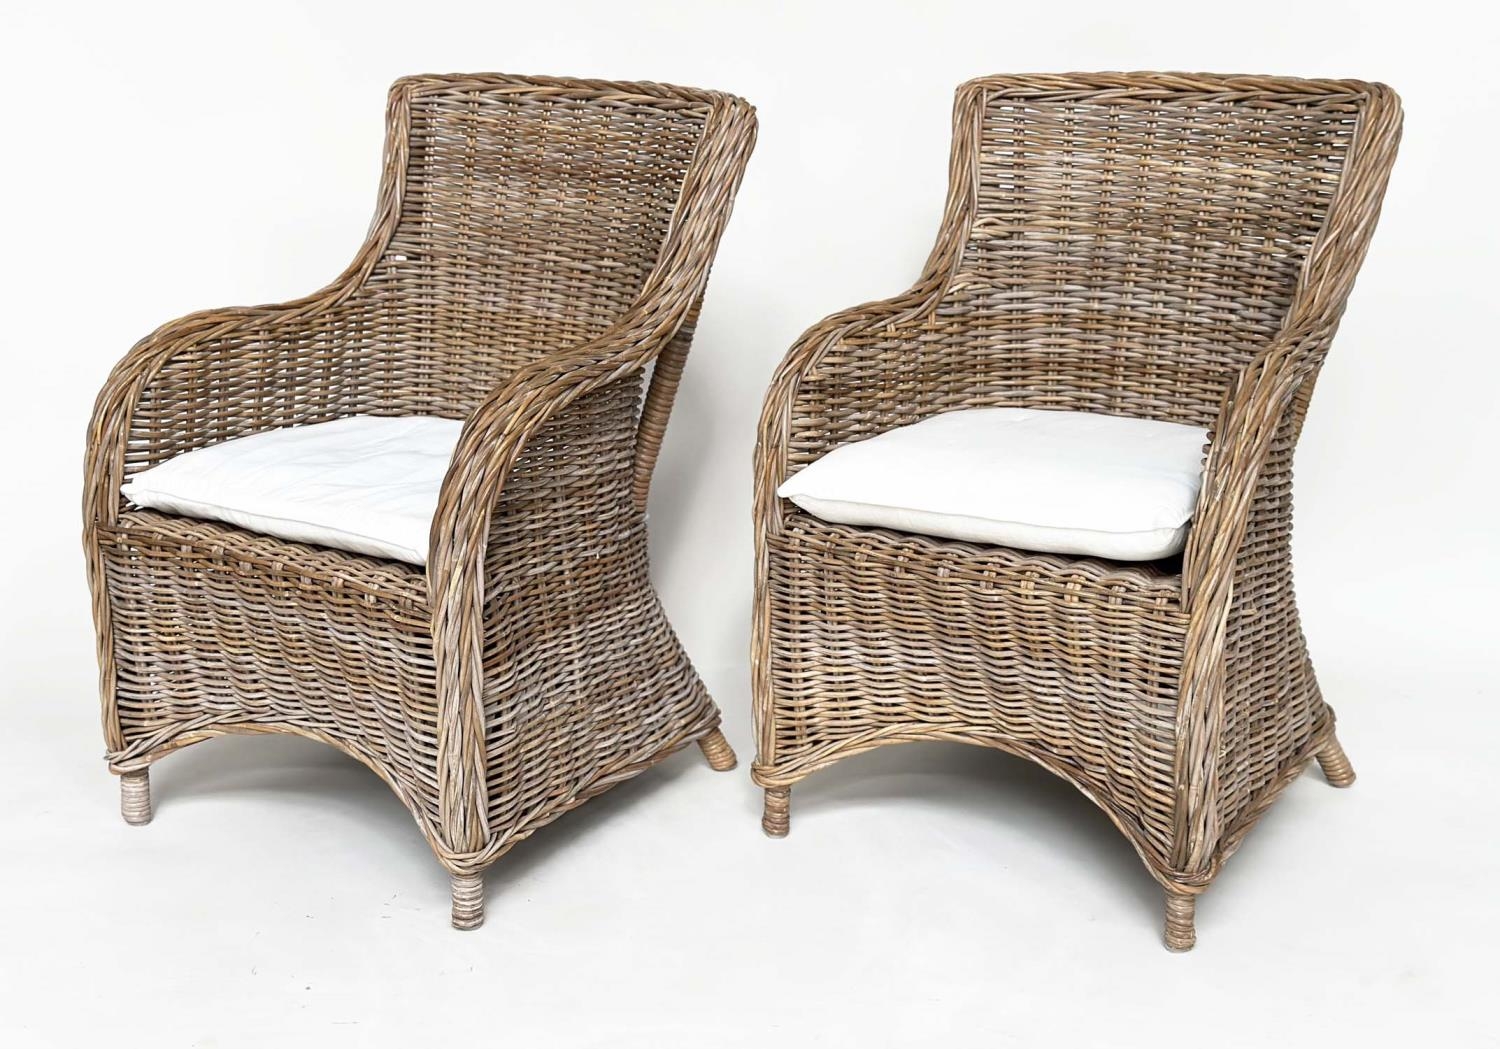 ORANGERY ARMCHAIRS, a pair, rattan framed and woven with cushion seats. (2) - Image 3 of 15